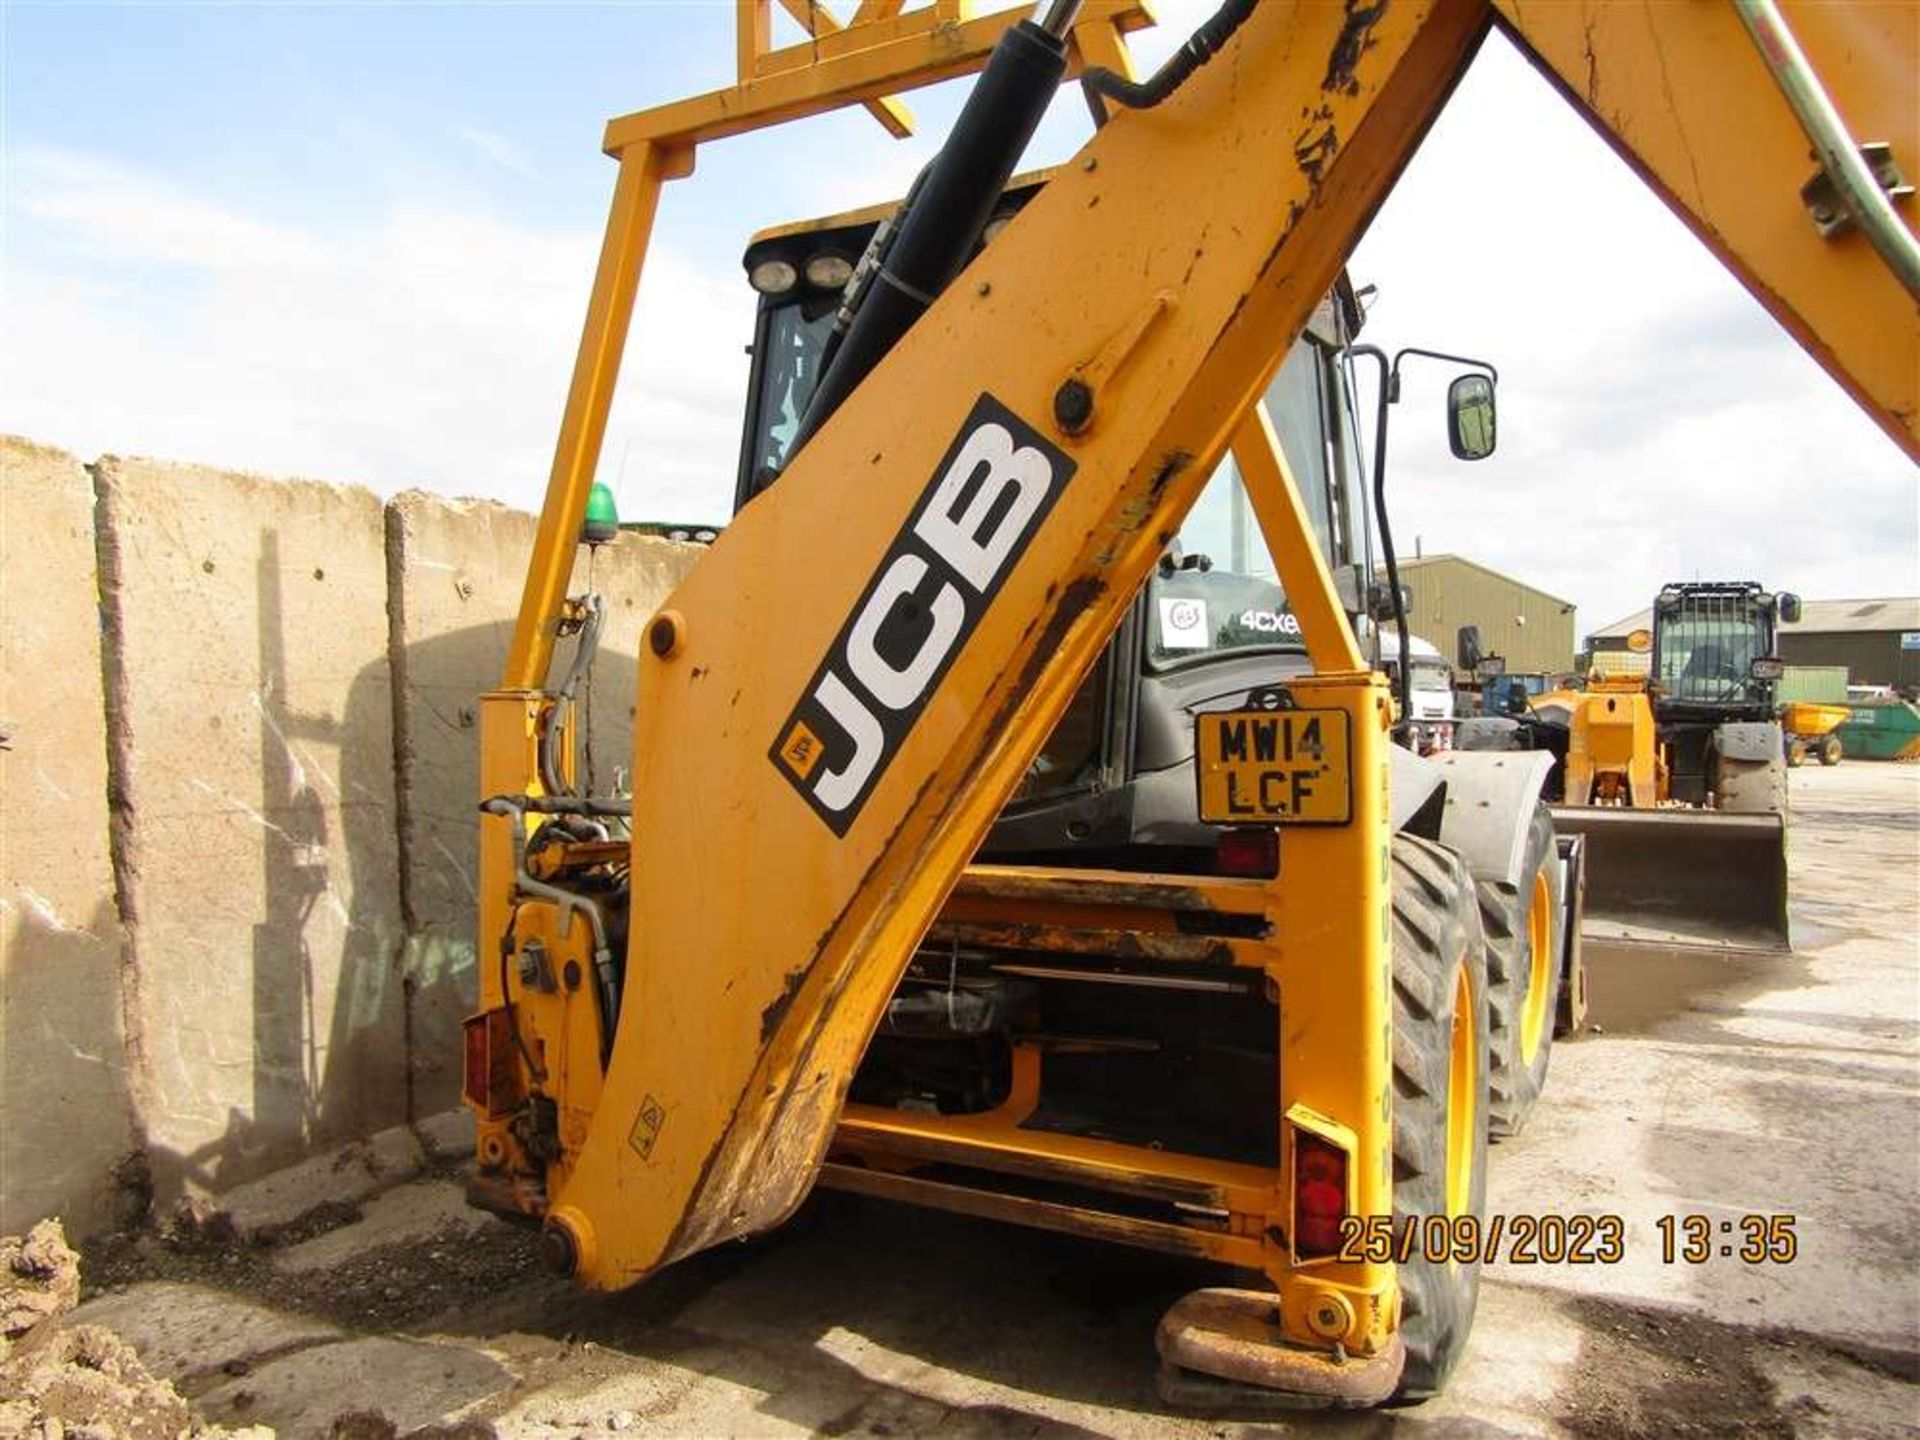 2014 14 reg JCB 4CX Super Site Master with Pole Height Limiters Spec & 4 Buckets - Image 4 of 10